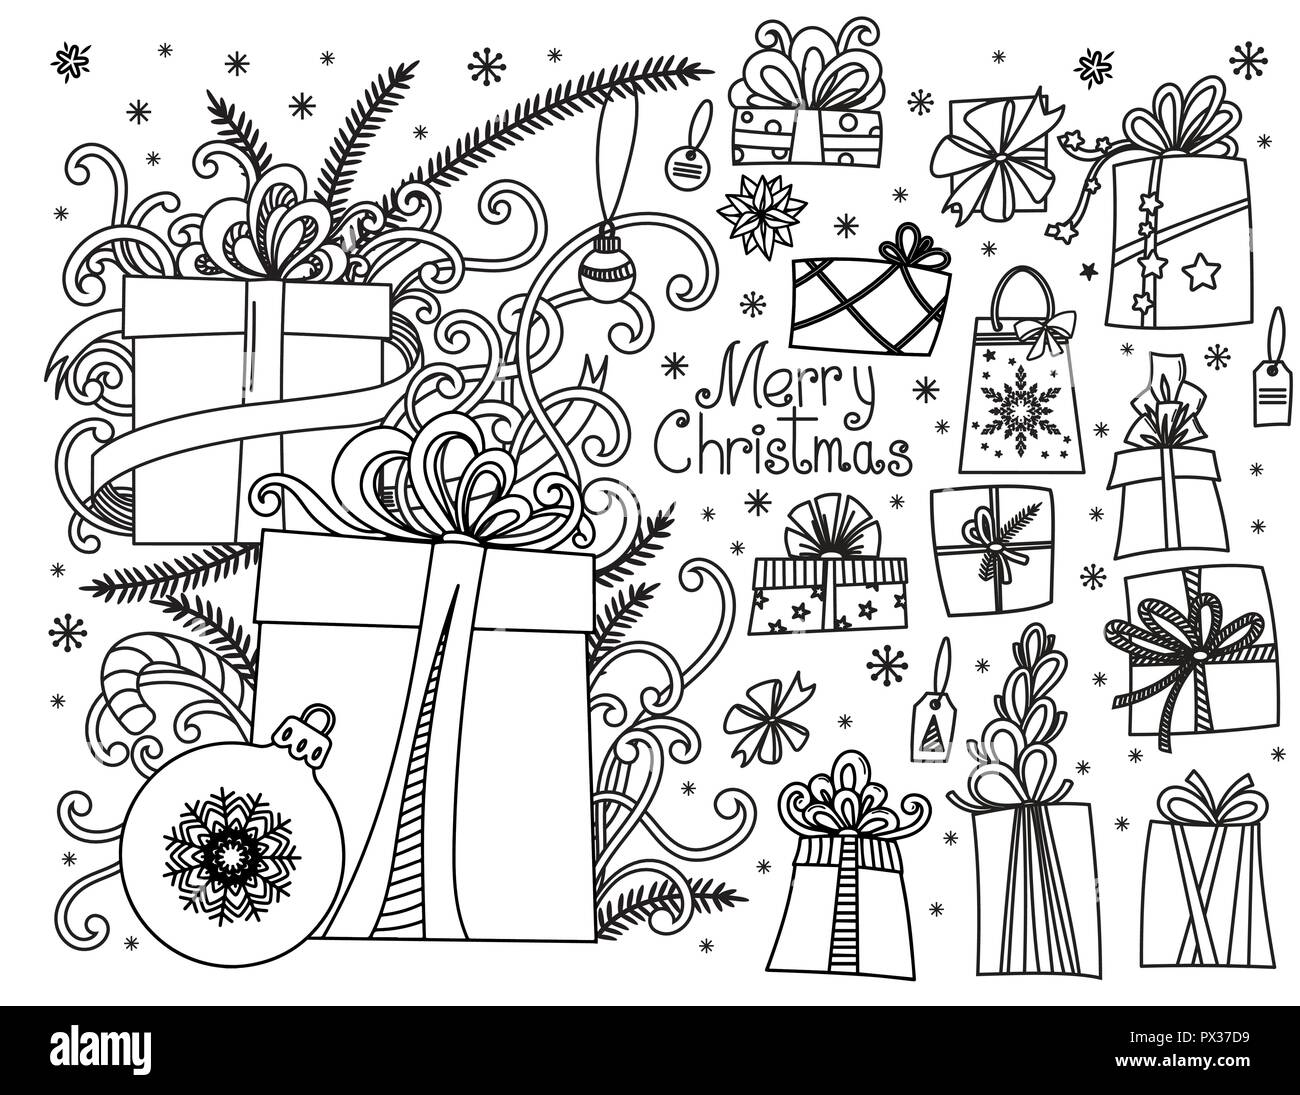 Doodle set of Christmas presents. Hand drawn cartoon gift boxes in various shapes and pile of holiday presents with ribbons and bow . Vector illustration isolated on white. Design elements collection. Stock Vector